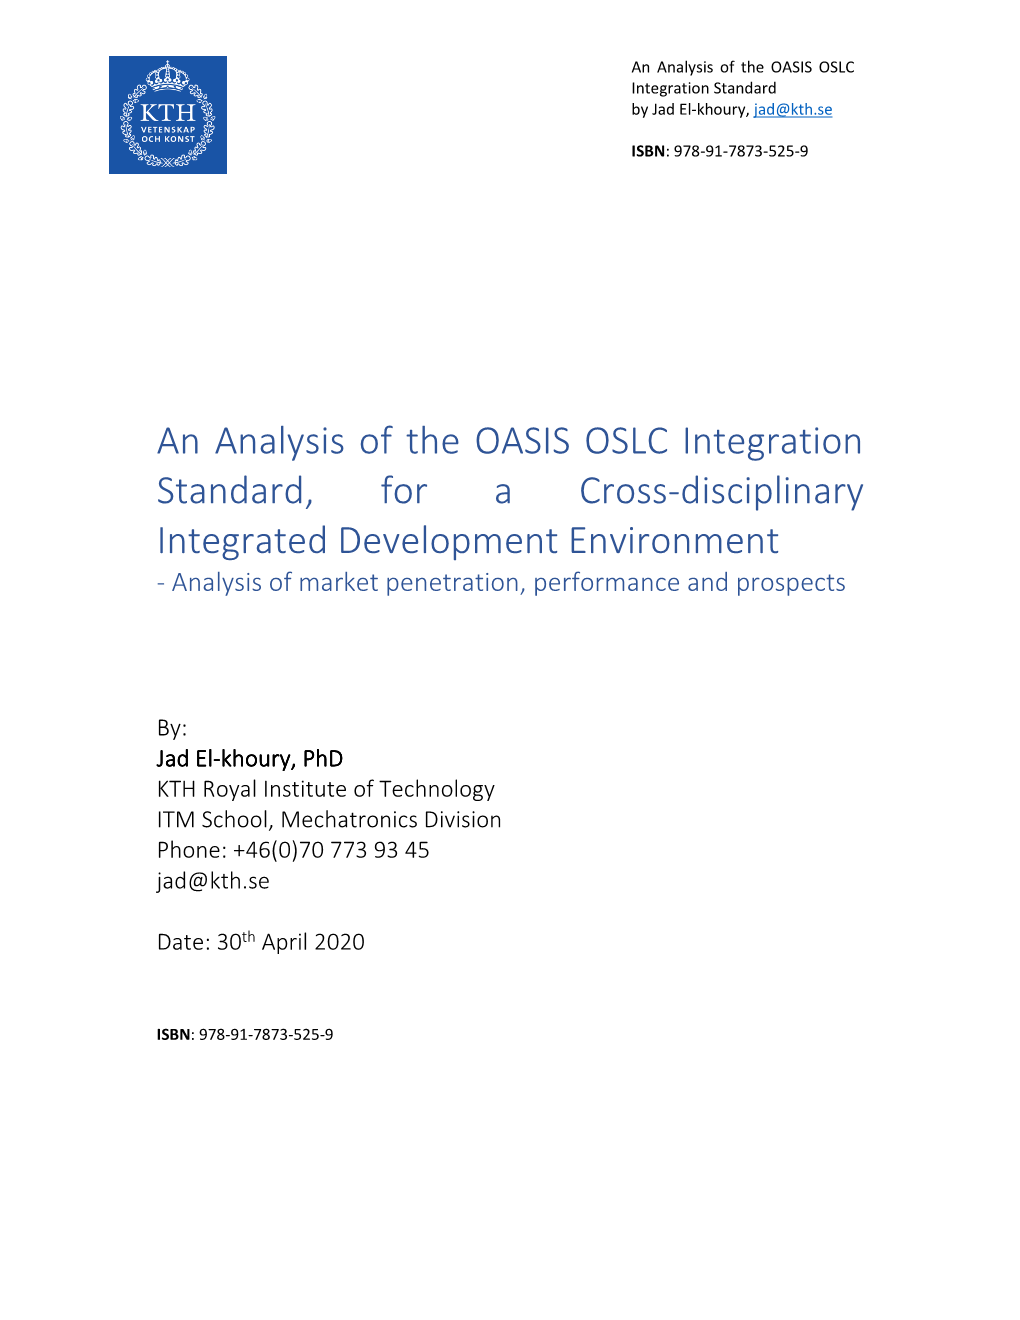 An Analysis of the OASIS OSLC Integration Standard, for a Cross